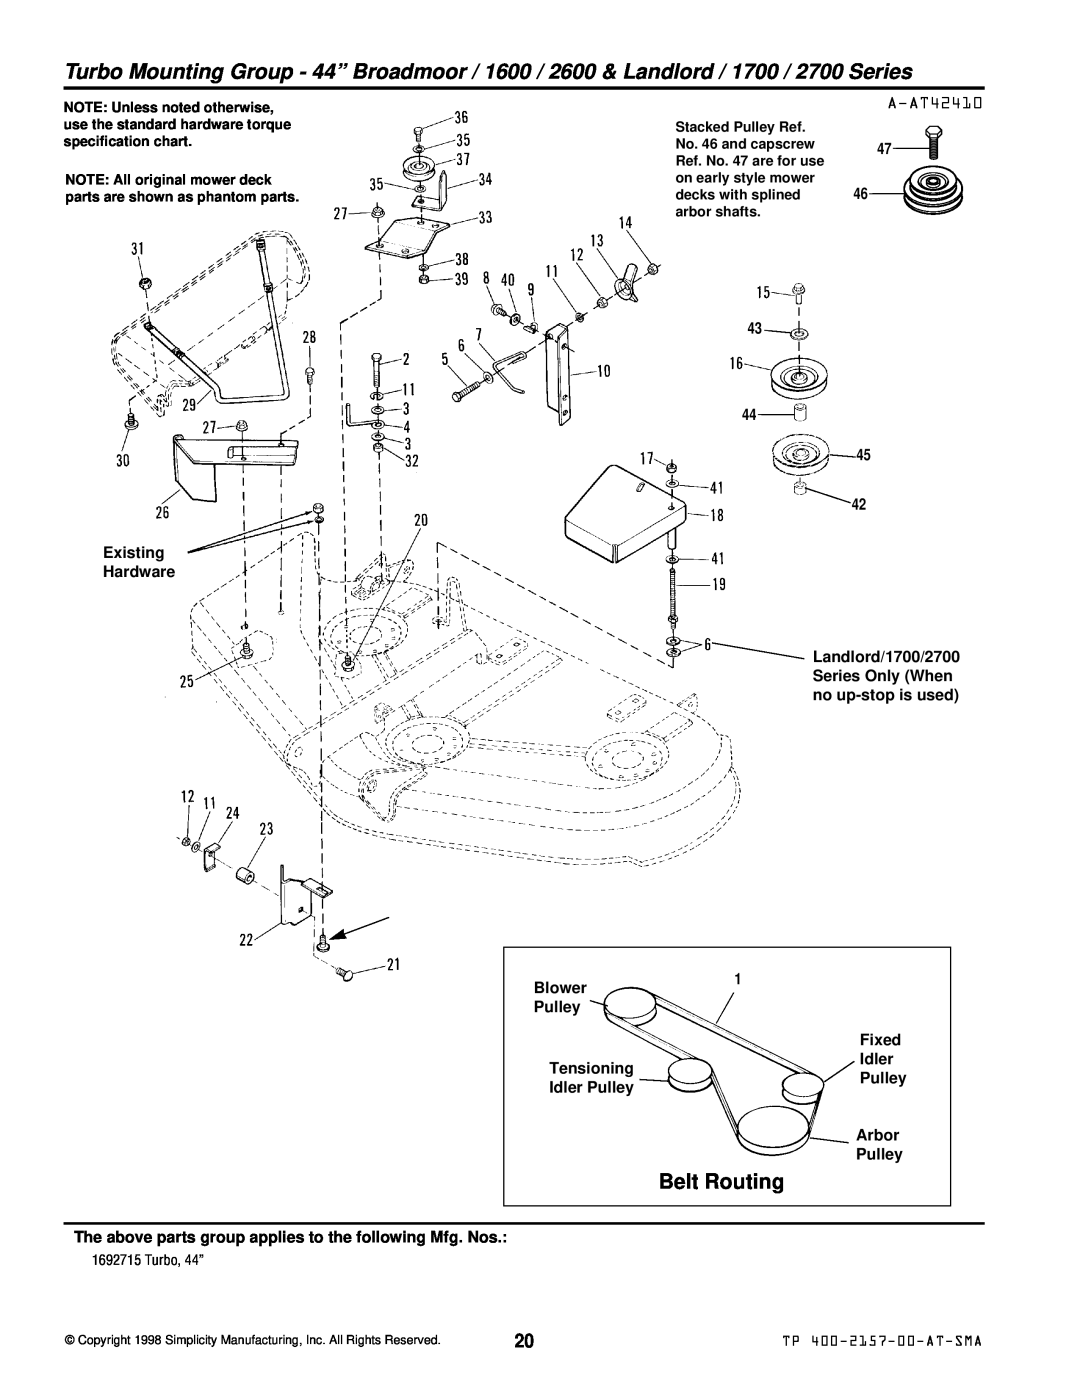 Simplicity 1692626 A-AT42410, Existing Hardware, Blower Pulley, Landlord/1700/2700 Series Only When no up-stop is used 